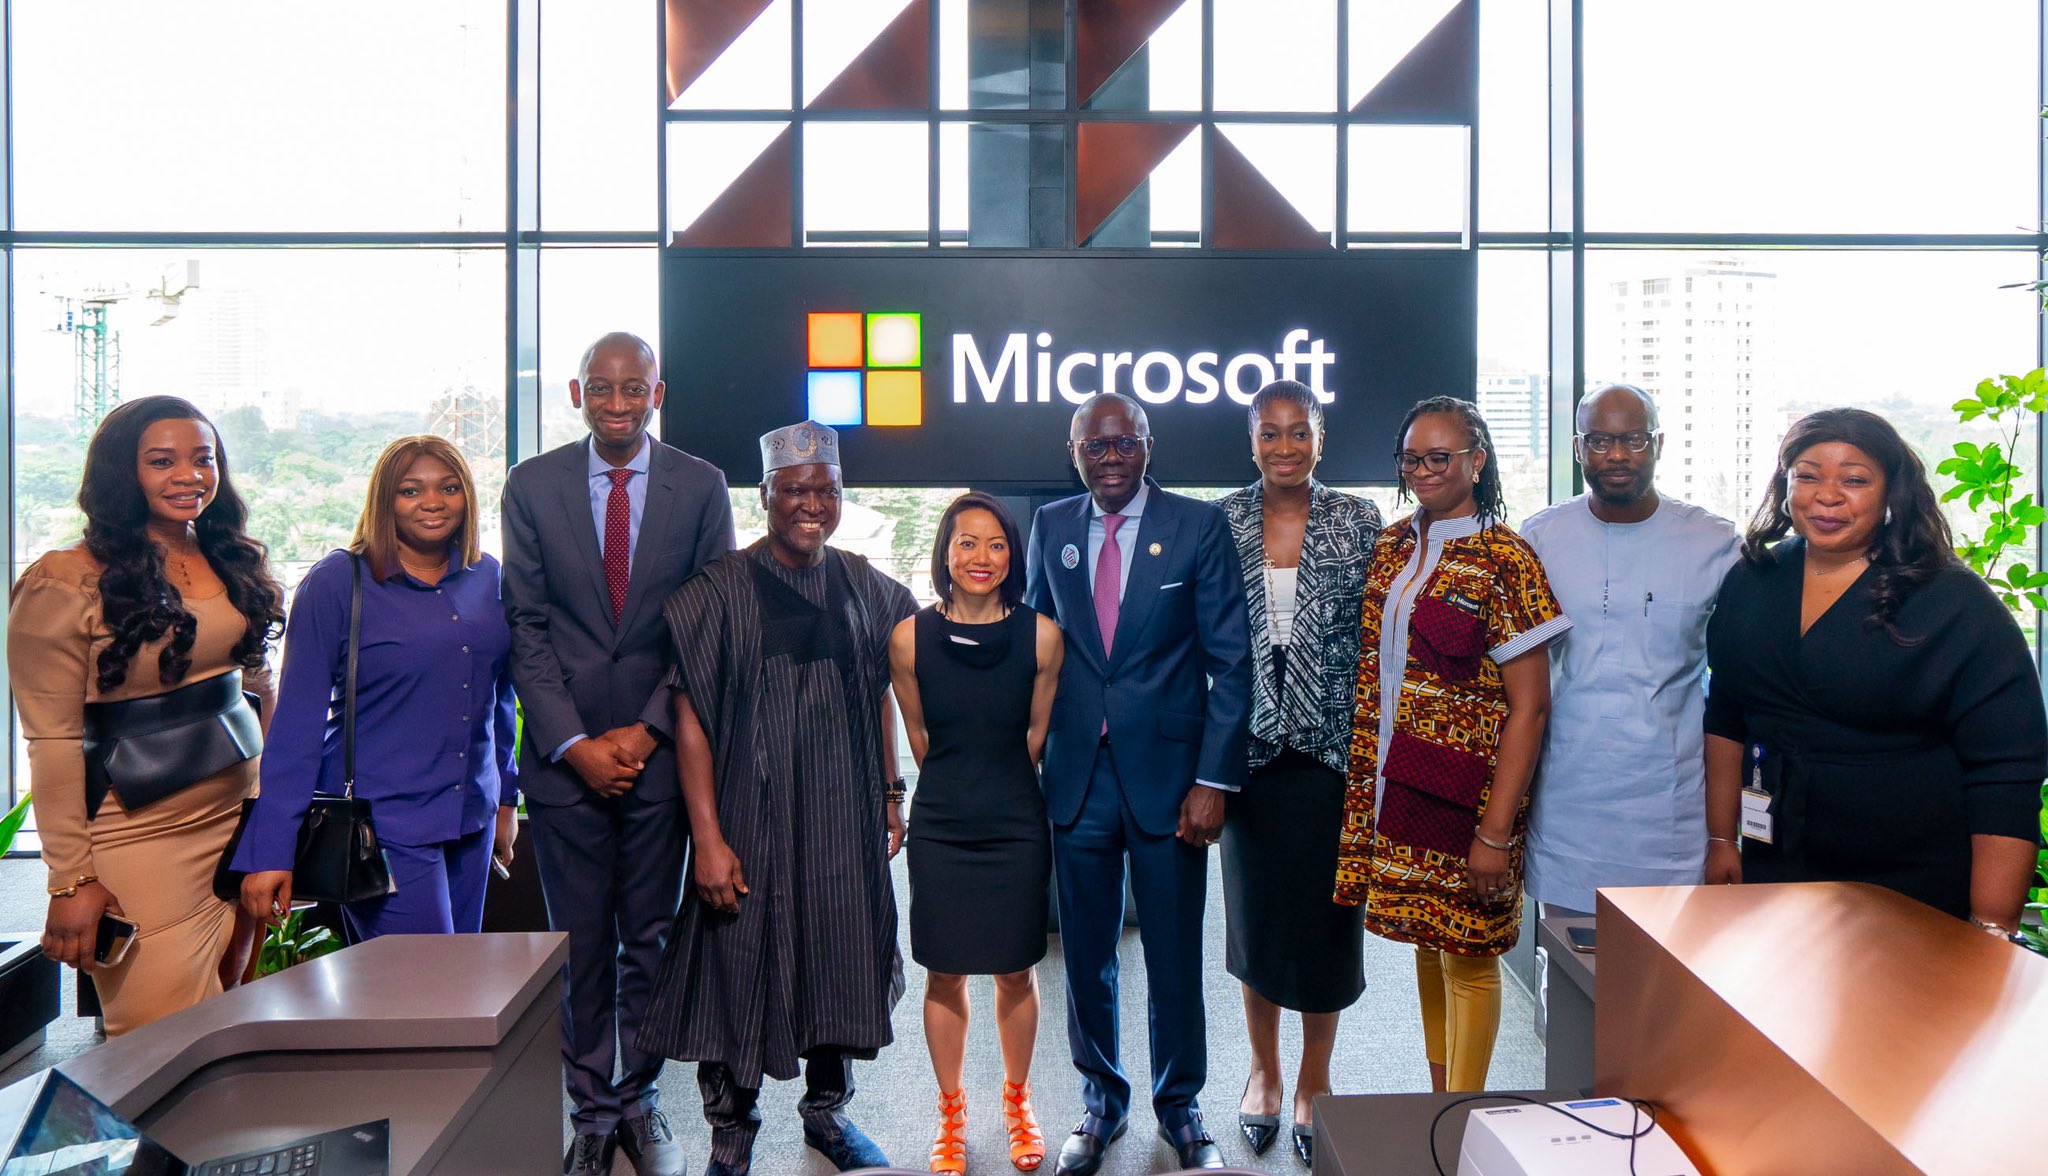 Babajide Sanwo-Olu on Twitter: "Today, I attended the official opening of Microsoft's African Development Centre in Ikoyi. Lagos embraces Big Tech and our state continues to play a role in strategically enabling